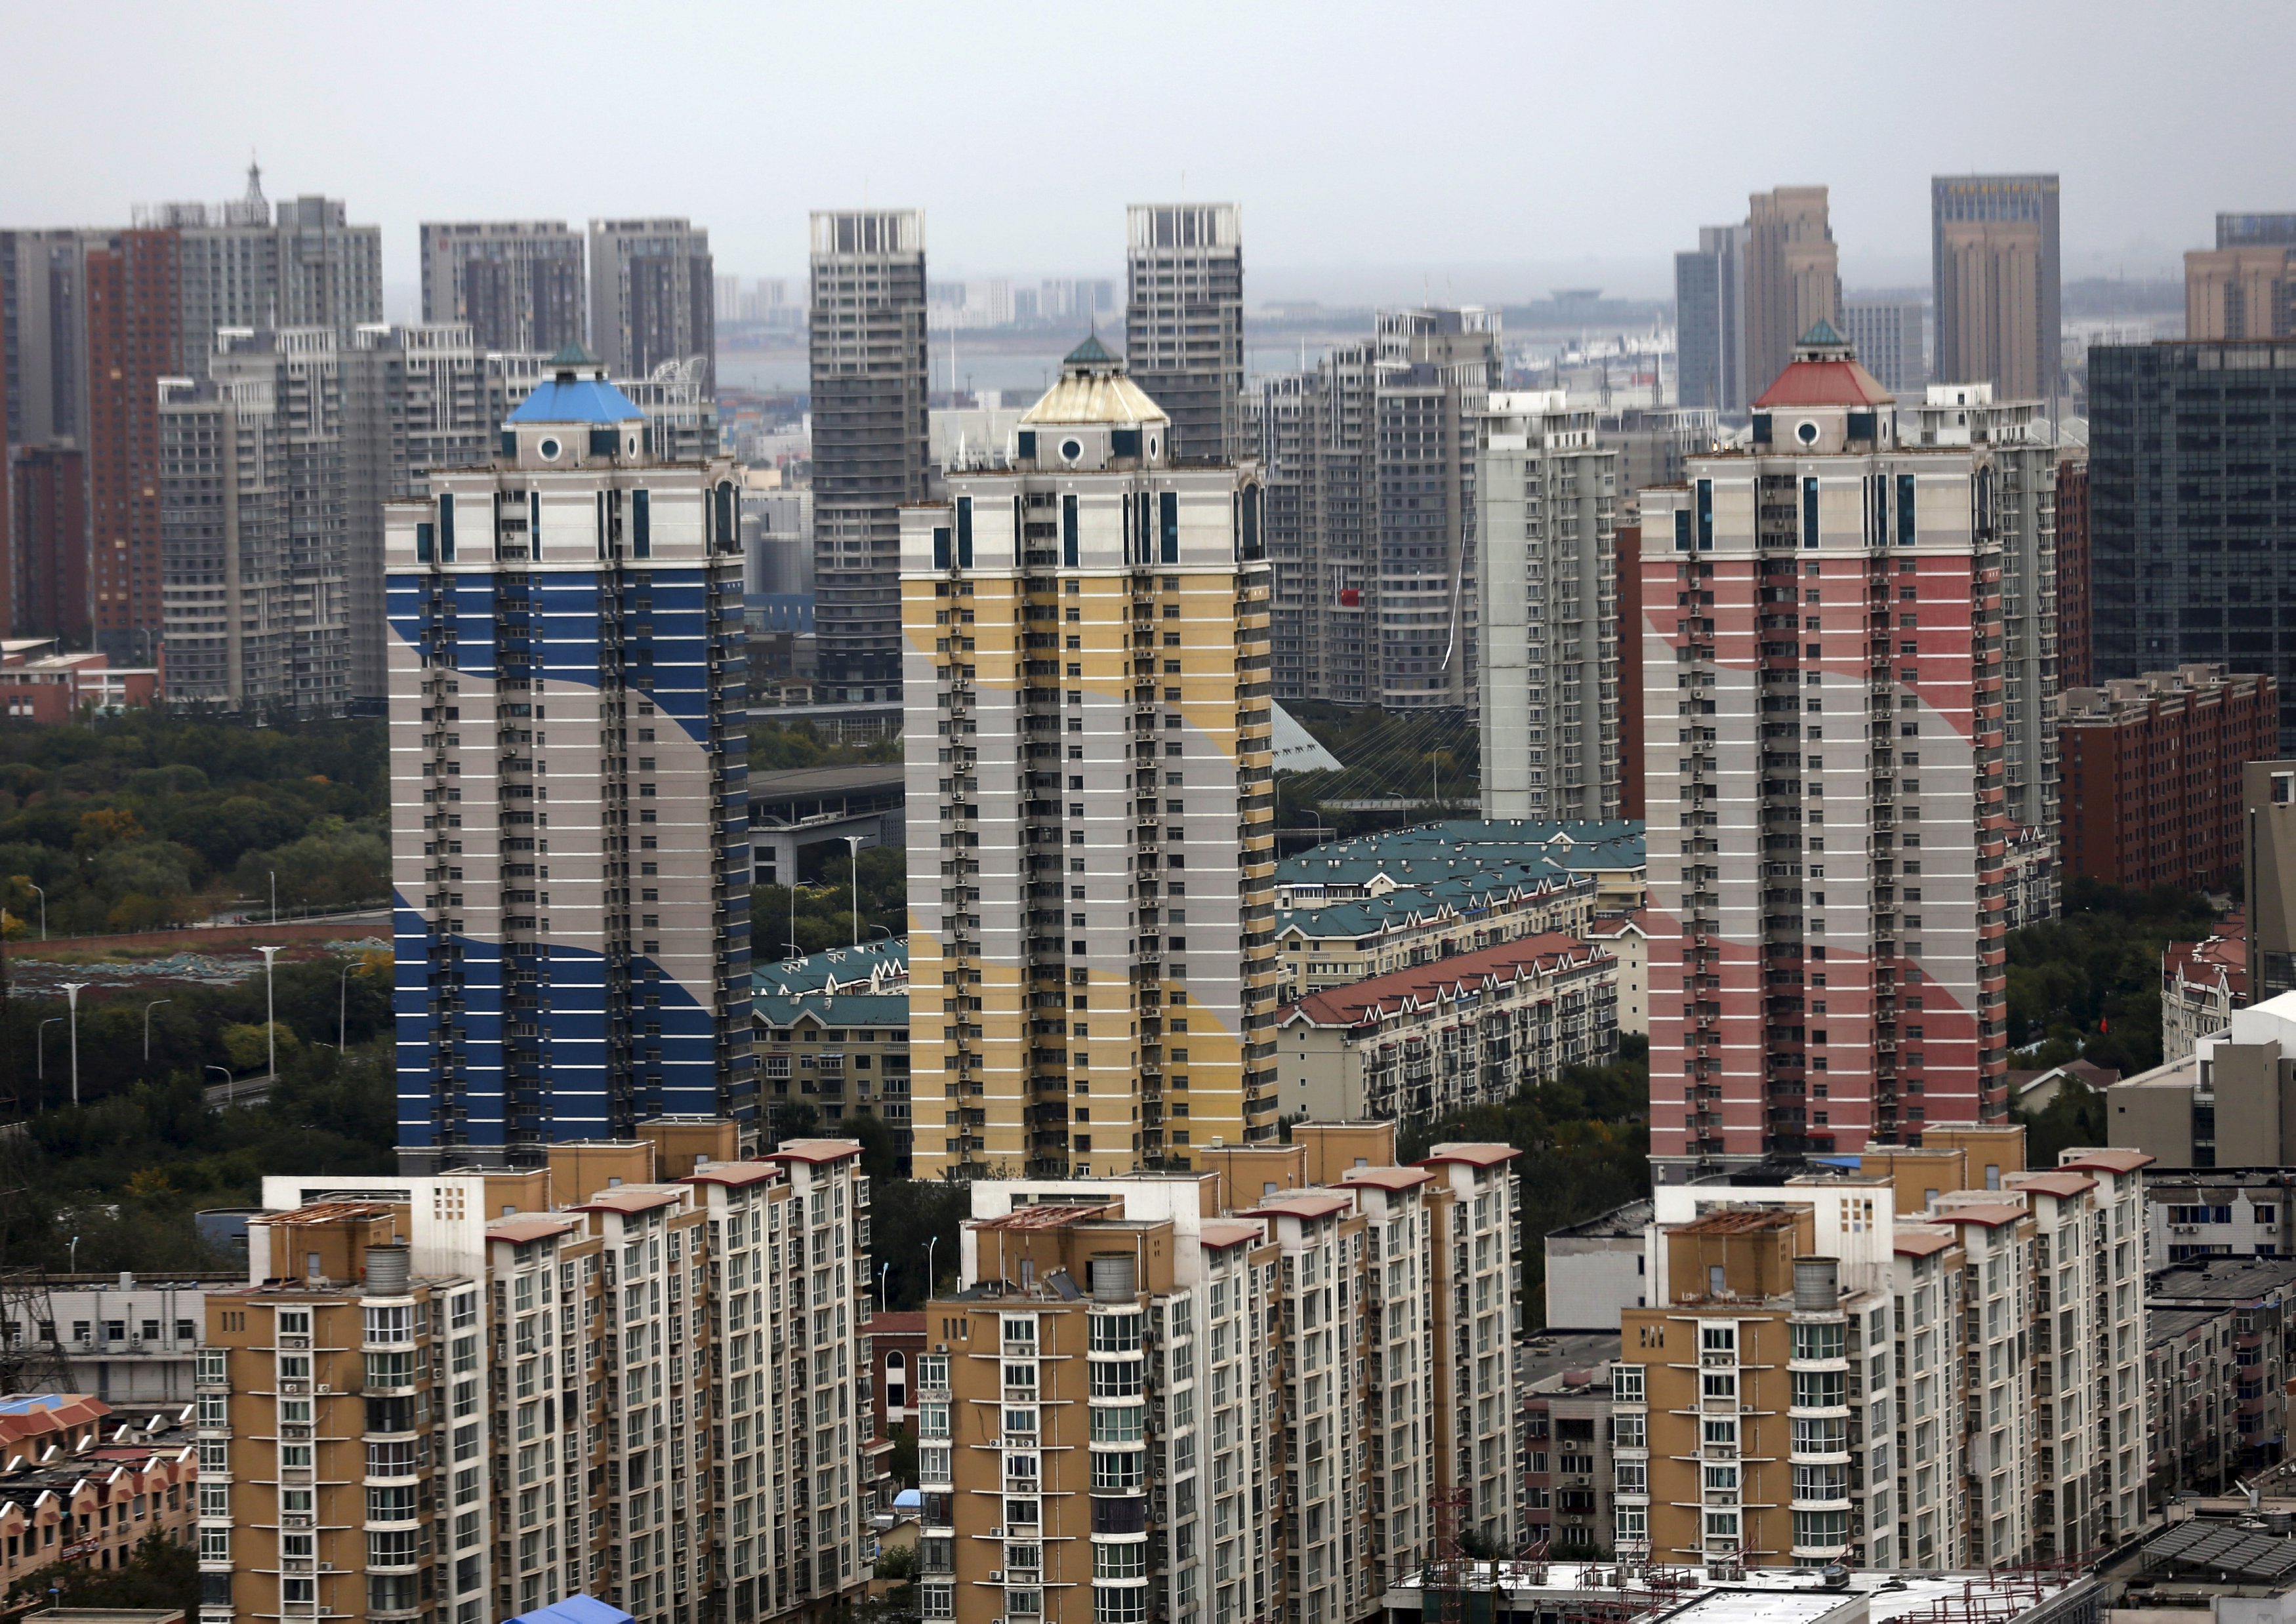 Residential buildings are seen at the Binhai new district in Tianjin, China, October 18, 2015. With prices of new homes rising by about 10 percent since August's chemical blast to meet an increase in demand, finding new homes outside the disaster area for most of those affected is a costly - and frustrating - process. Picture taken October 18, 2015. REUTERS/Kim Kyung-Hoon